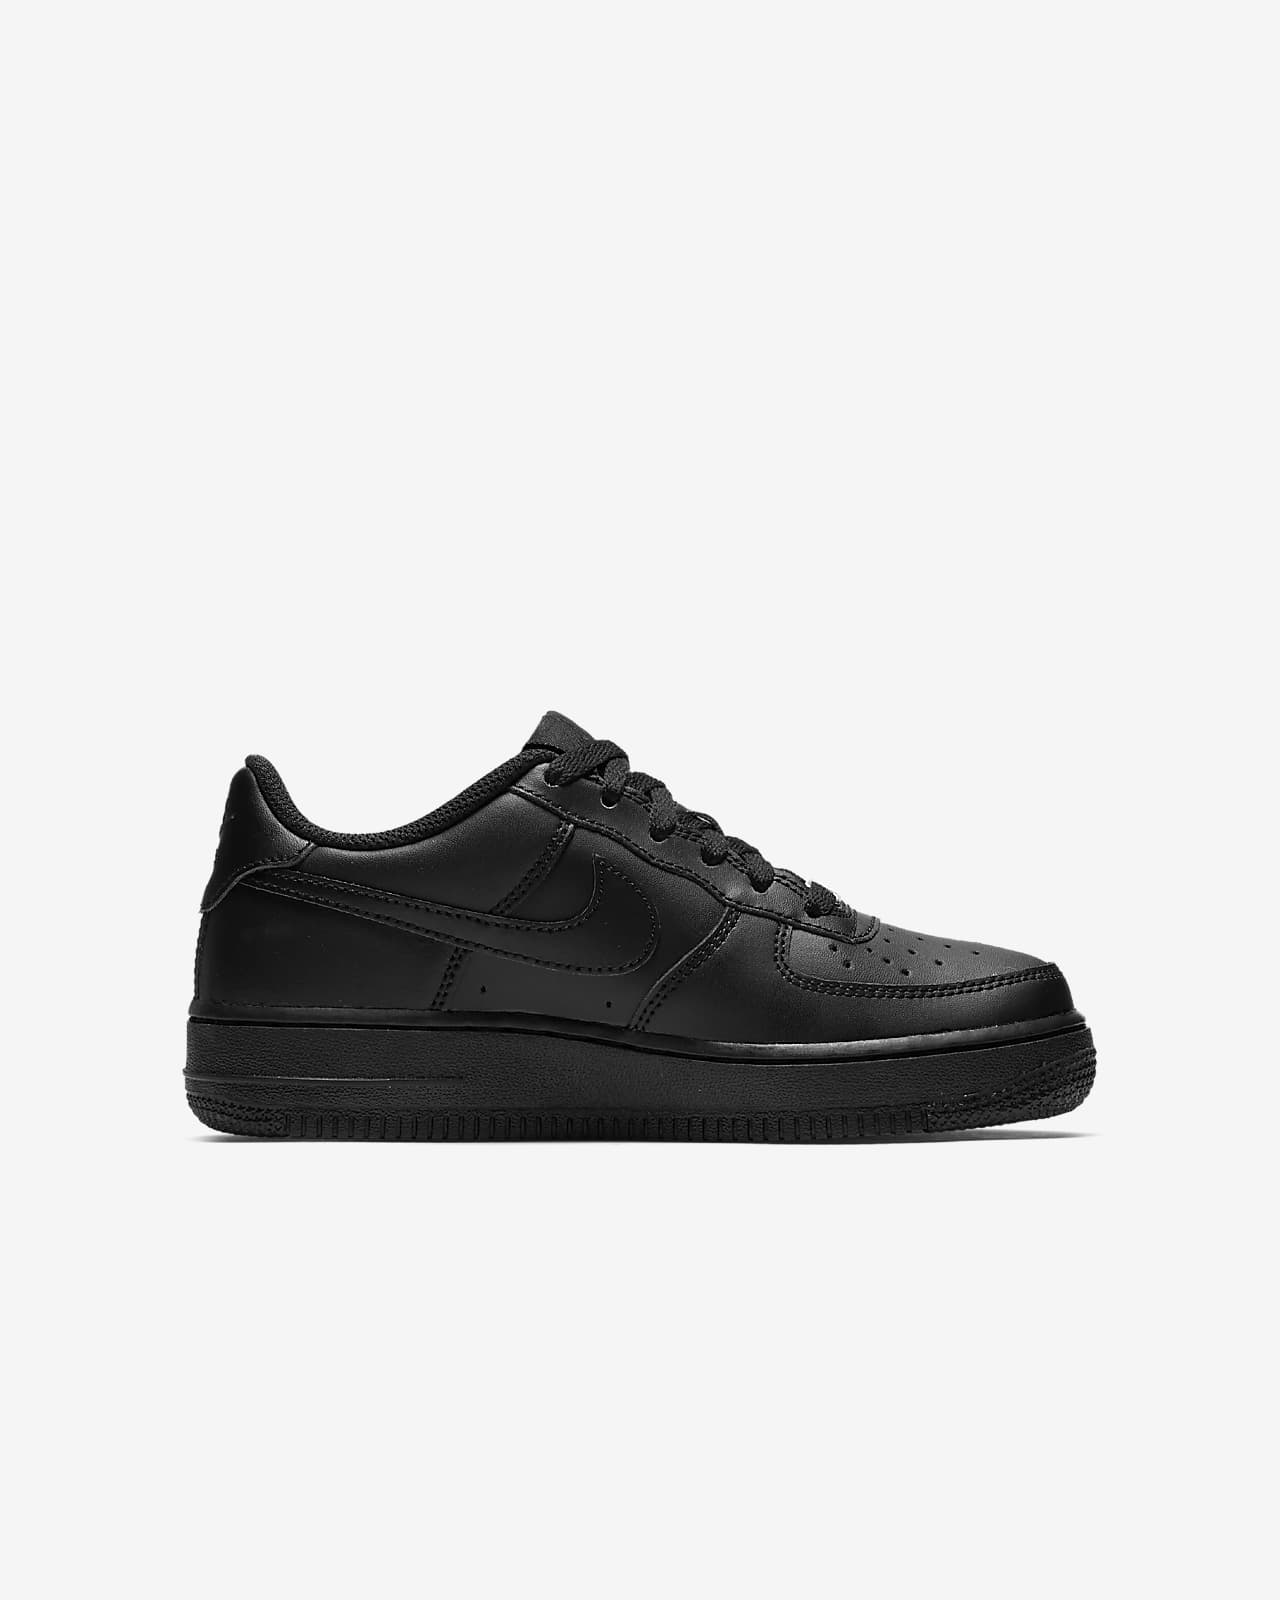 size 4 black air force 1